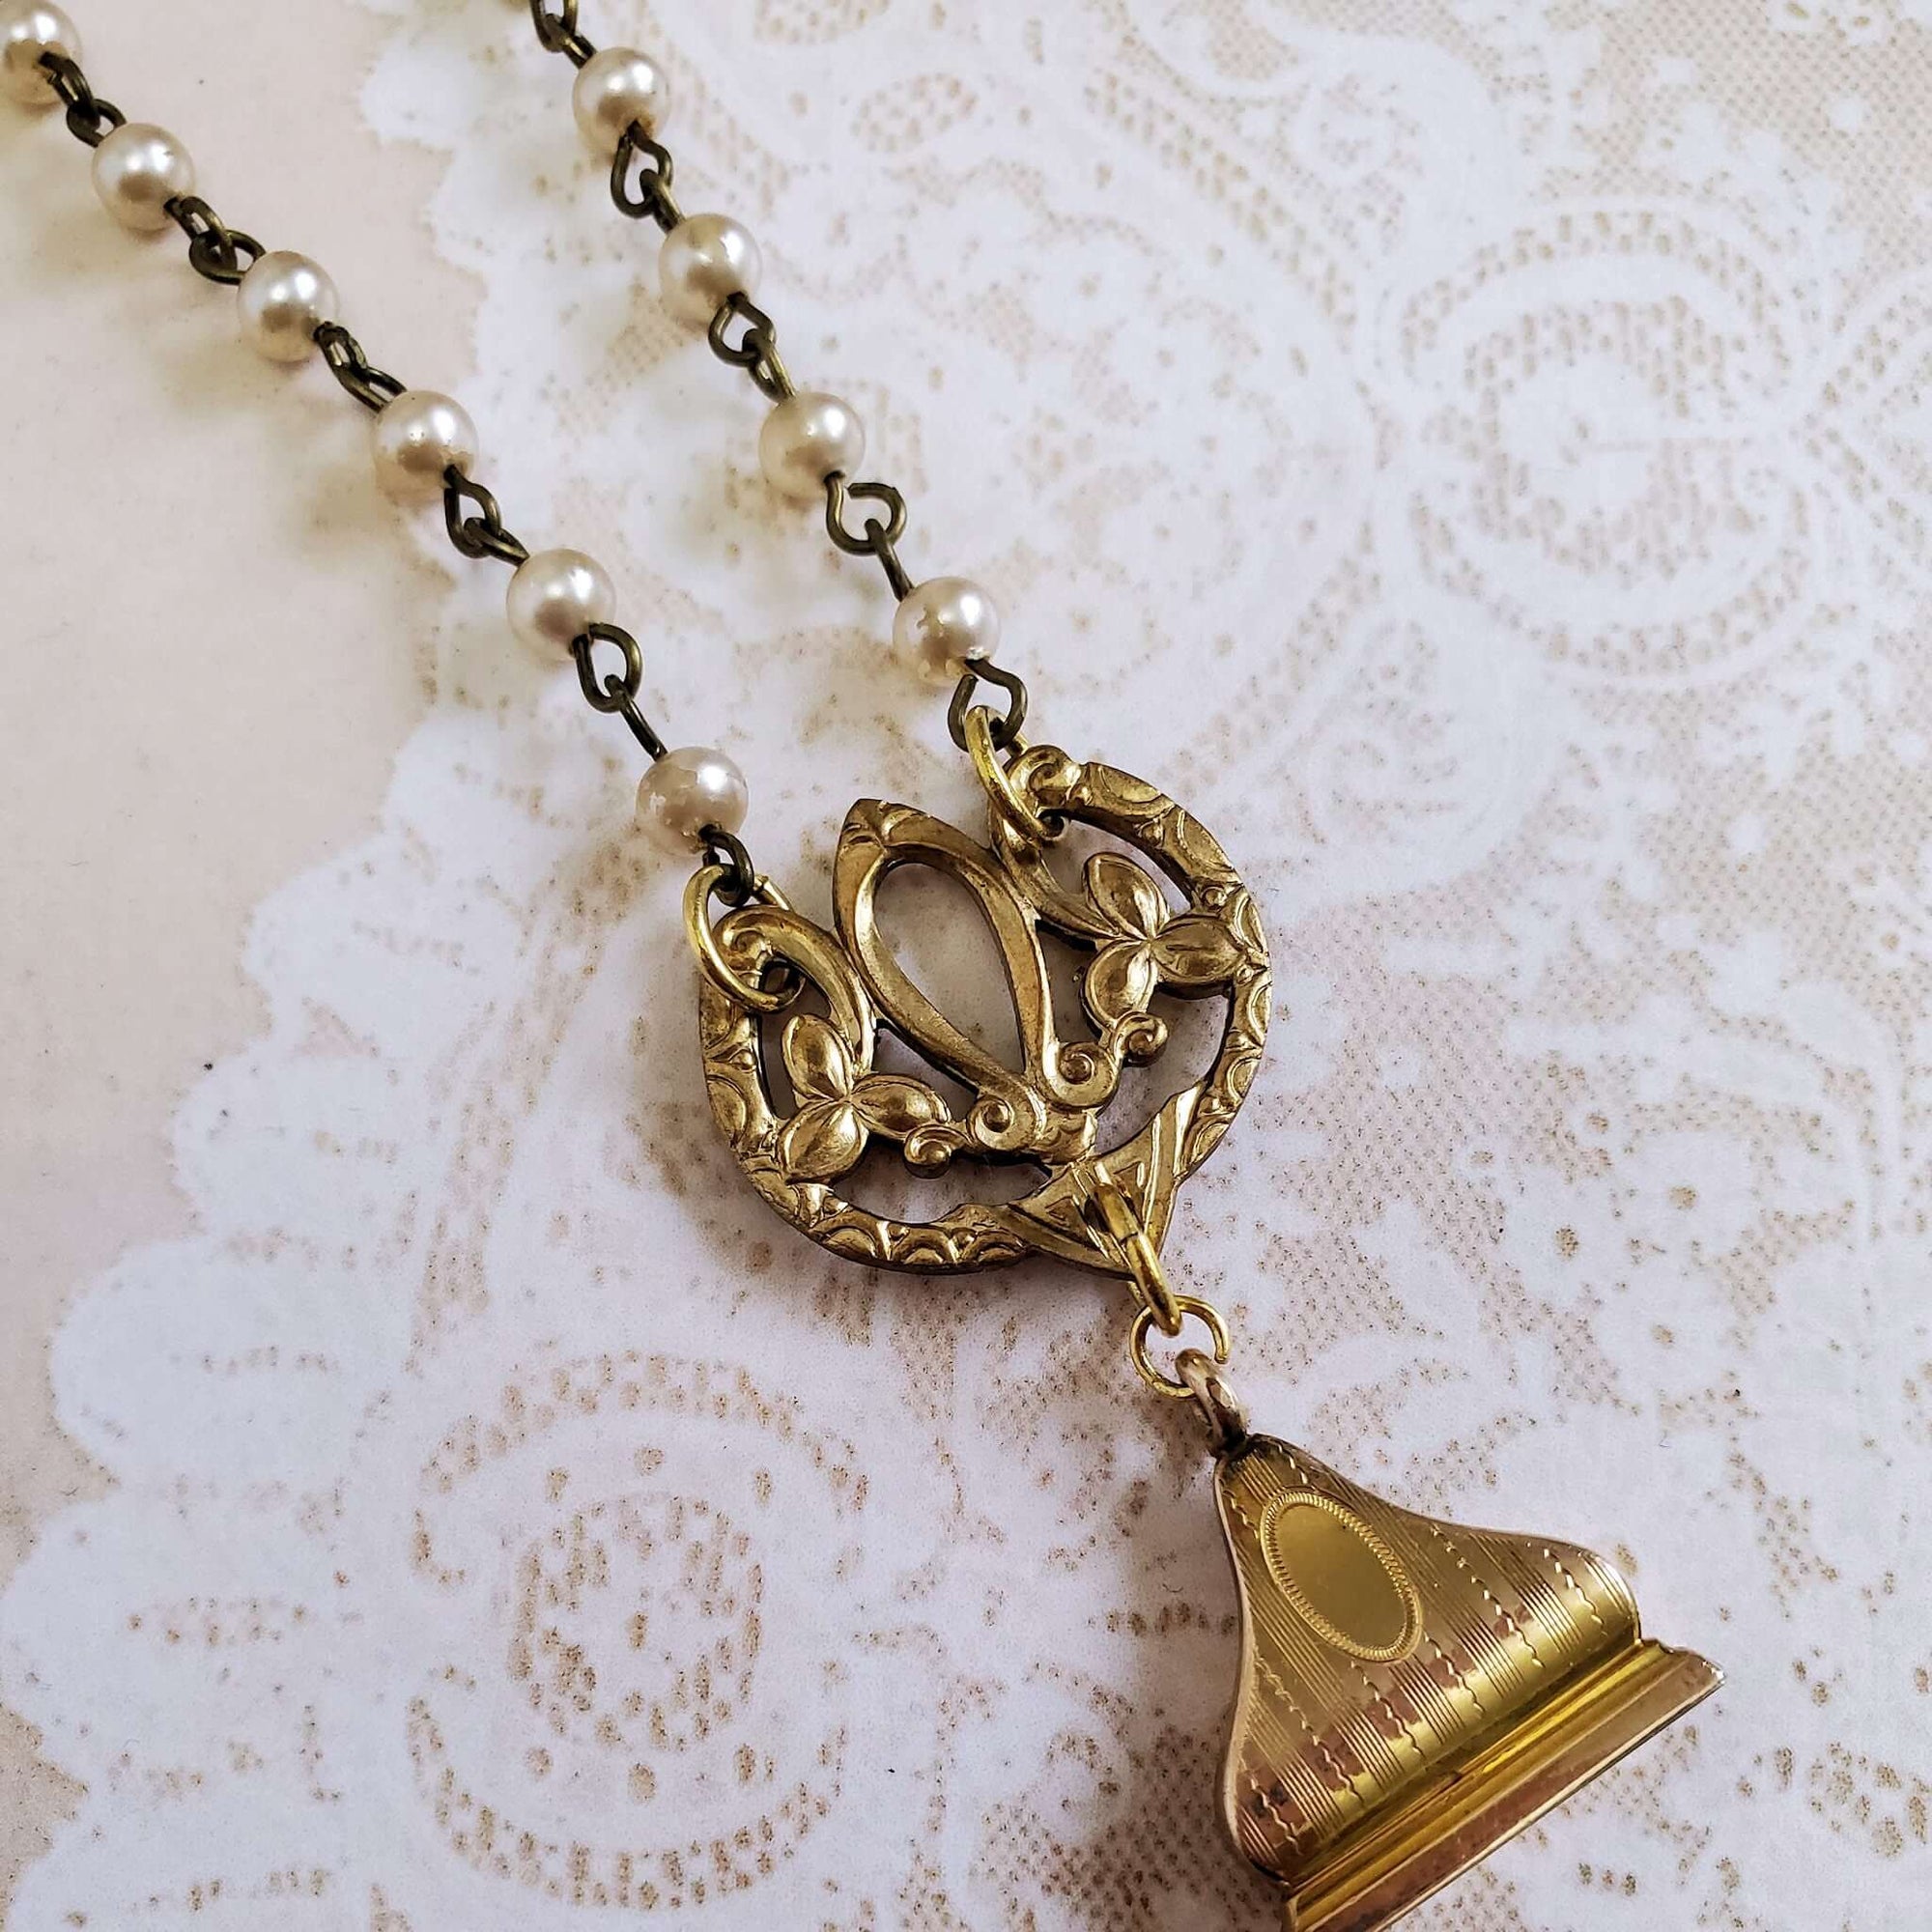 Dual Pendant featuring Brass Floral Filigree Pendant and Antique Fob